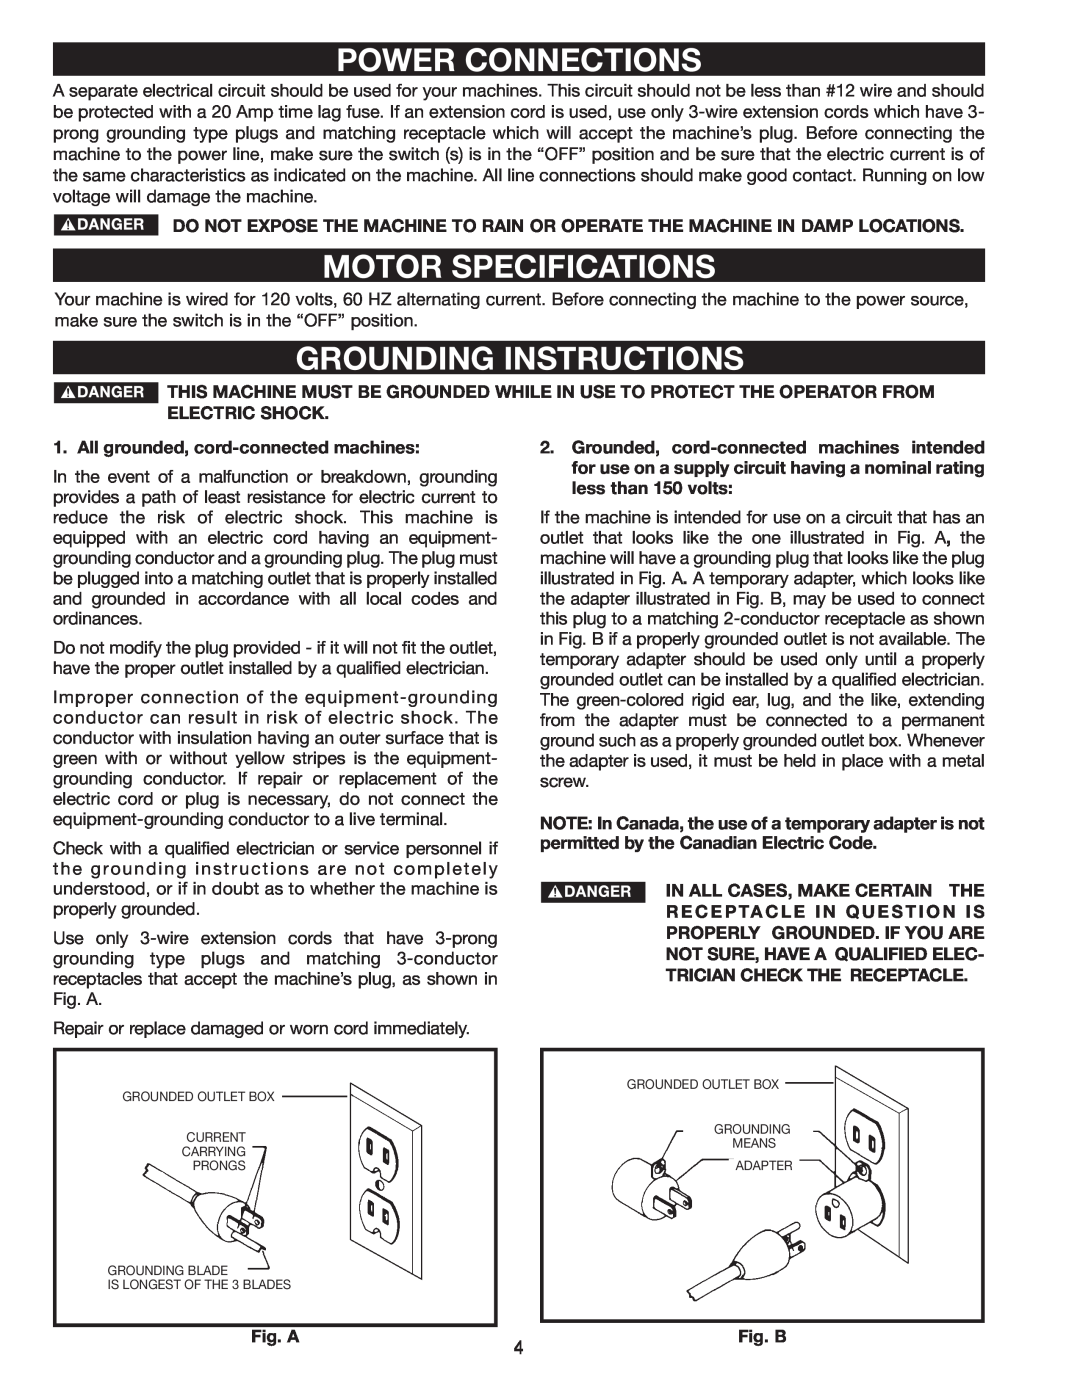 Delta 50-875 instruction manual Power Connections, Motor Specifications, Grounding Instructions 